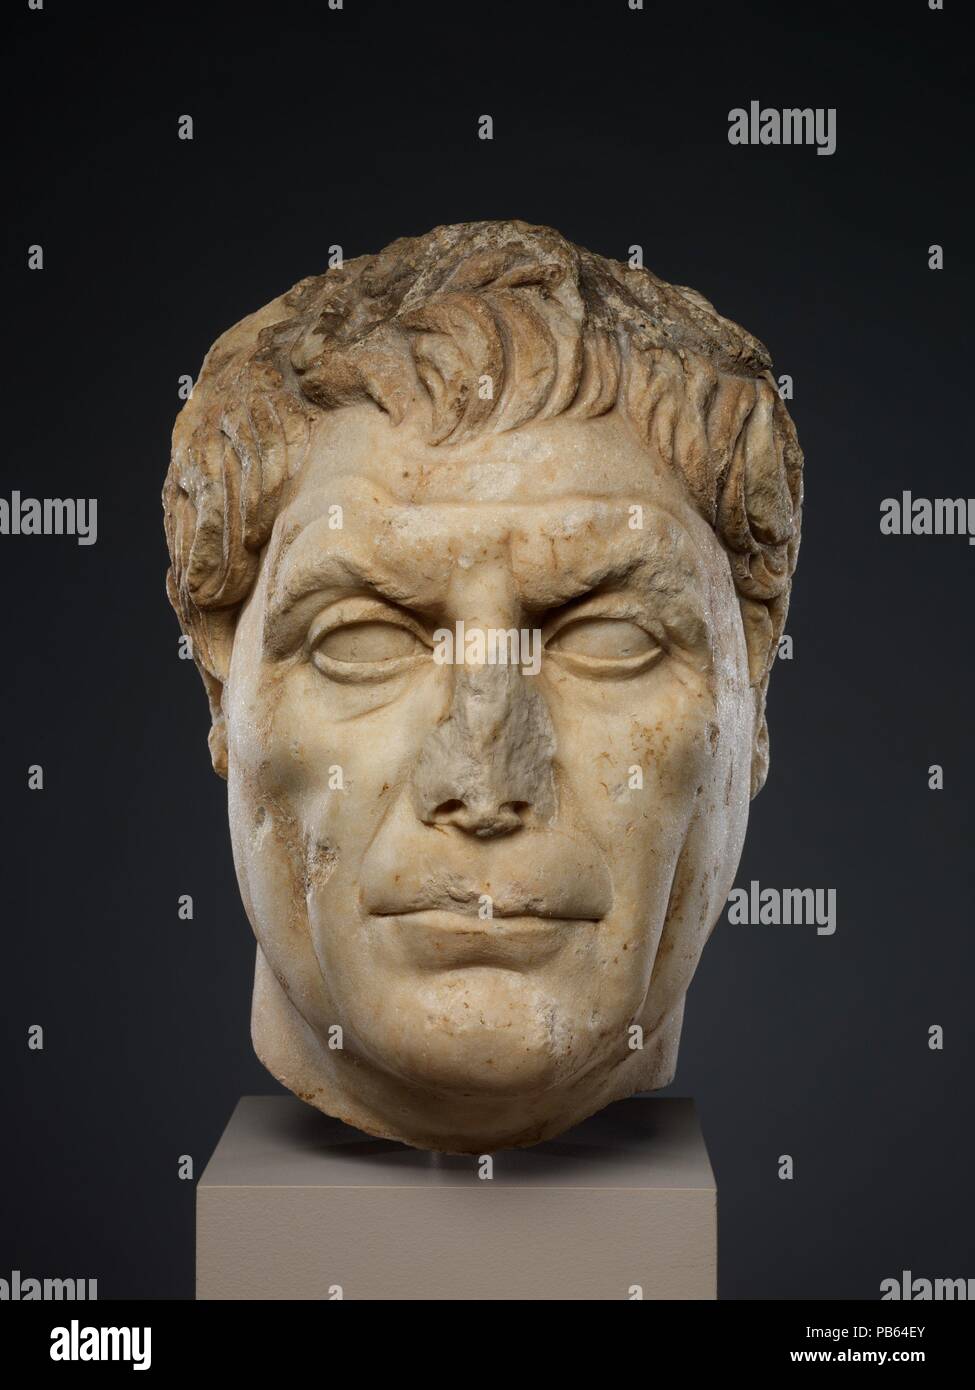 Marble portrait of a man. Culture: Roman. Dimensions: H. 11 3/16 in. (28.4 cm). Date: ca. A.D. 100.  Like this powerful image of a middle-aged man, many Flavian portraits show the same uncompromising representation of aging flesh that marked portraits of the Republican period. Museum: Metropolitan Museum of Art, New York, USA. Stock Photo